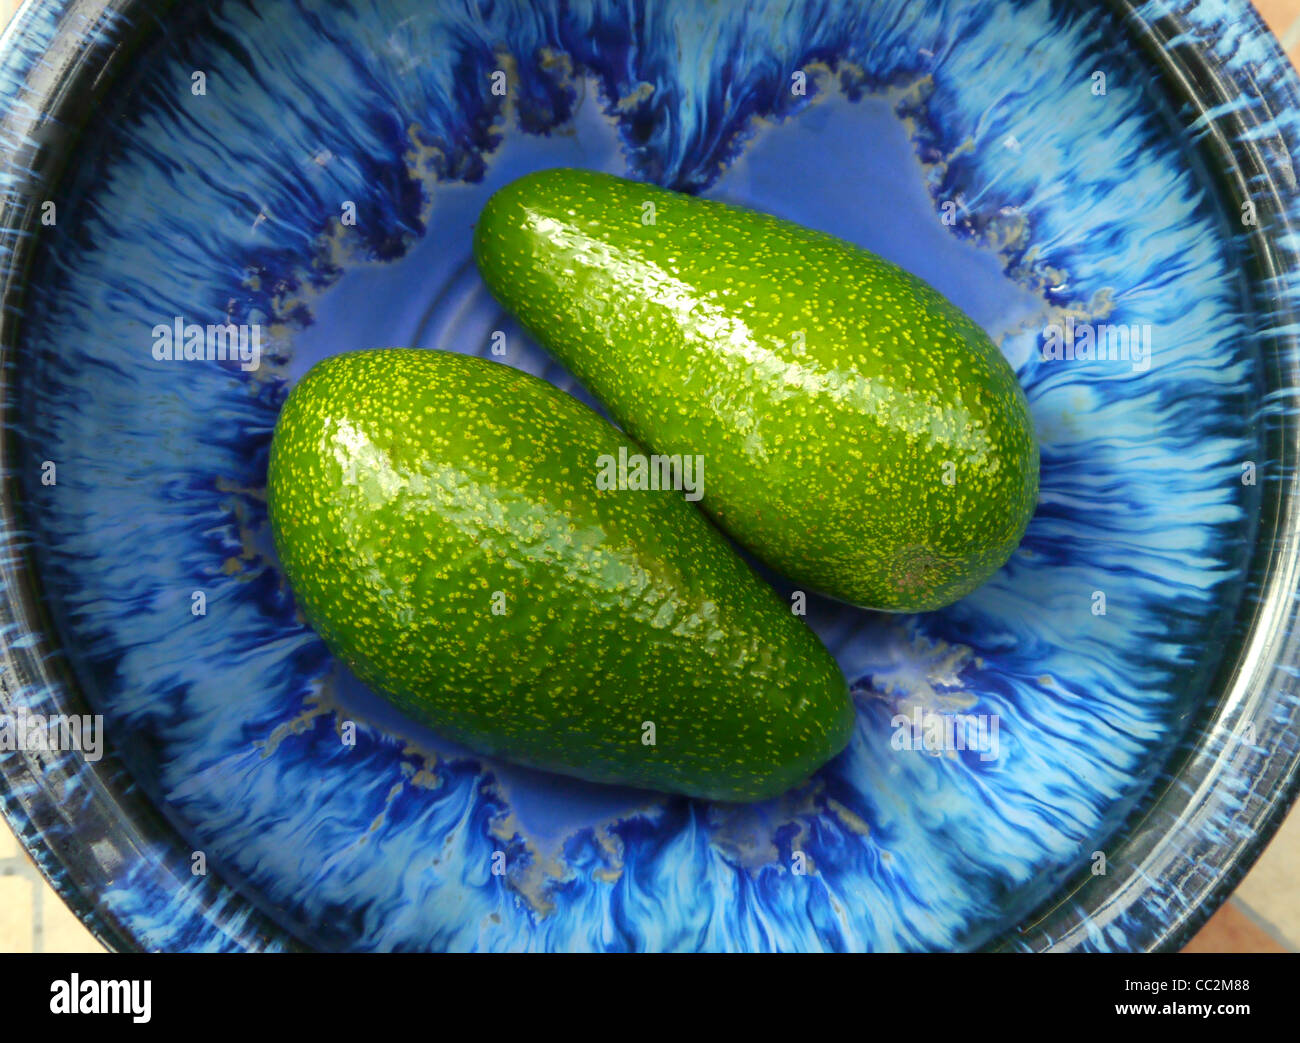 Two avocado pears in a blue bowl Stock Photo